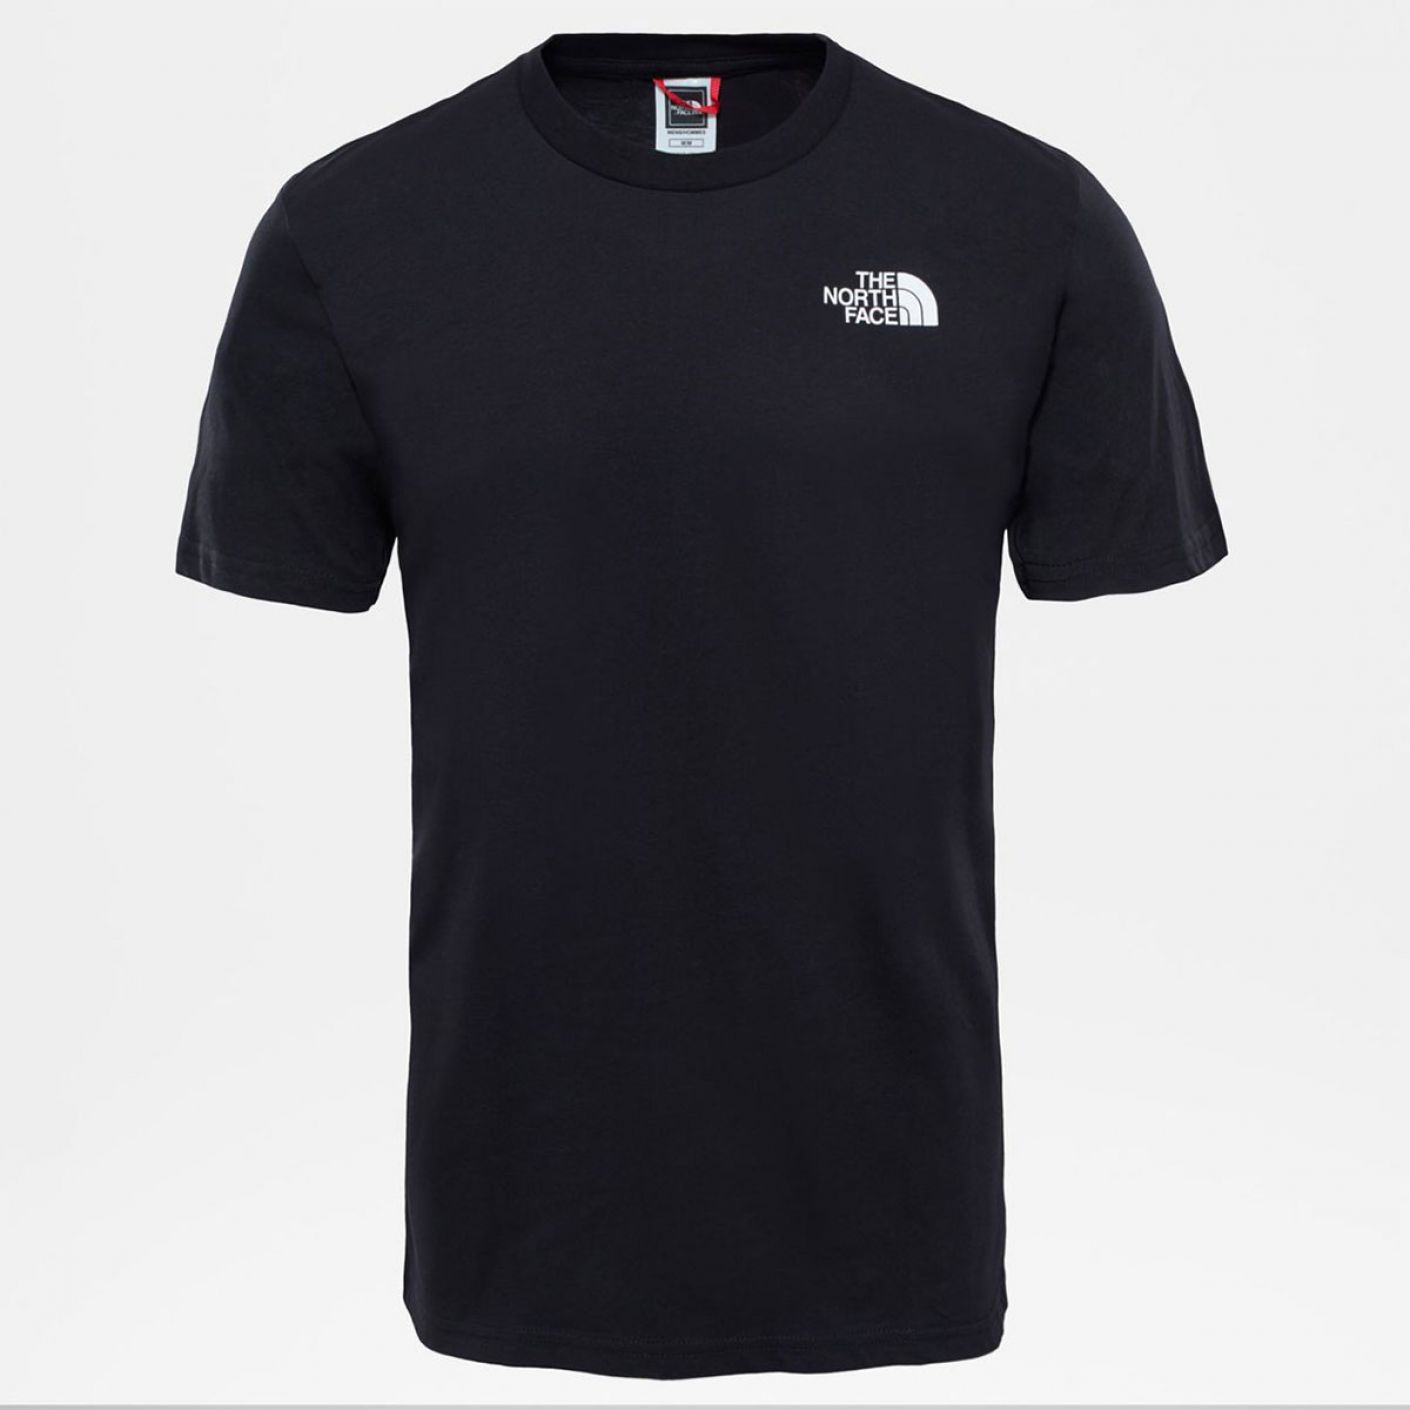 The North Face Men's Simple Dome Black T-shirt